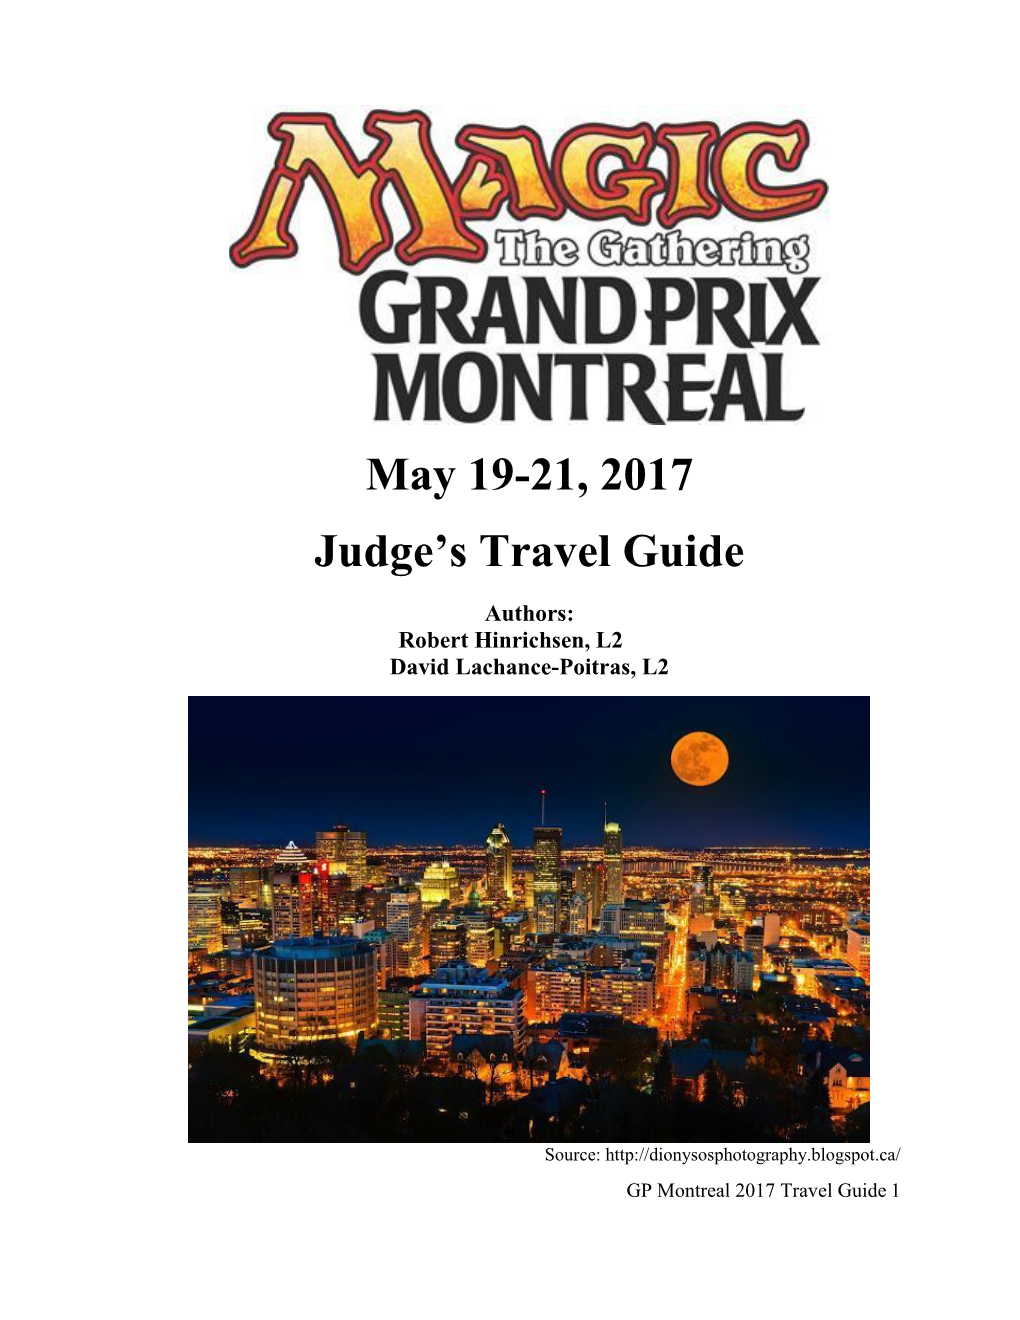 GP Montreal 2017 Travel Guide 1 Contents